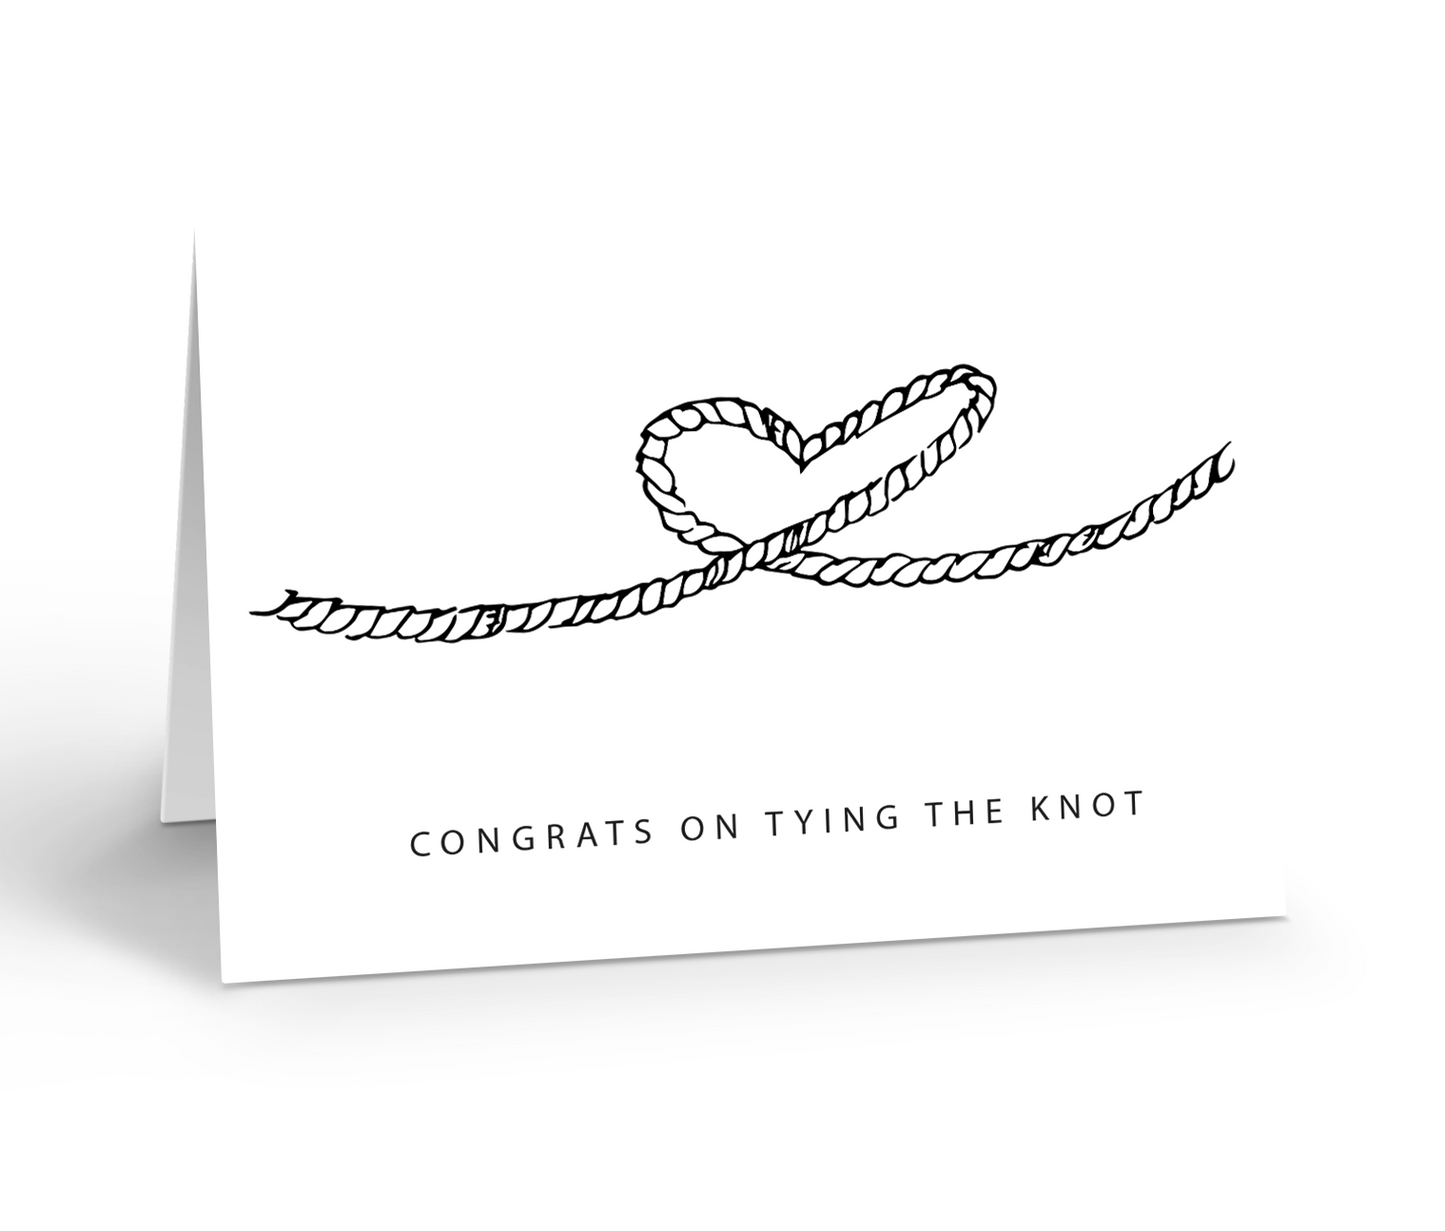 Congrats on tying the knot greeting card